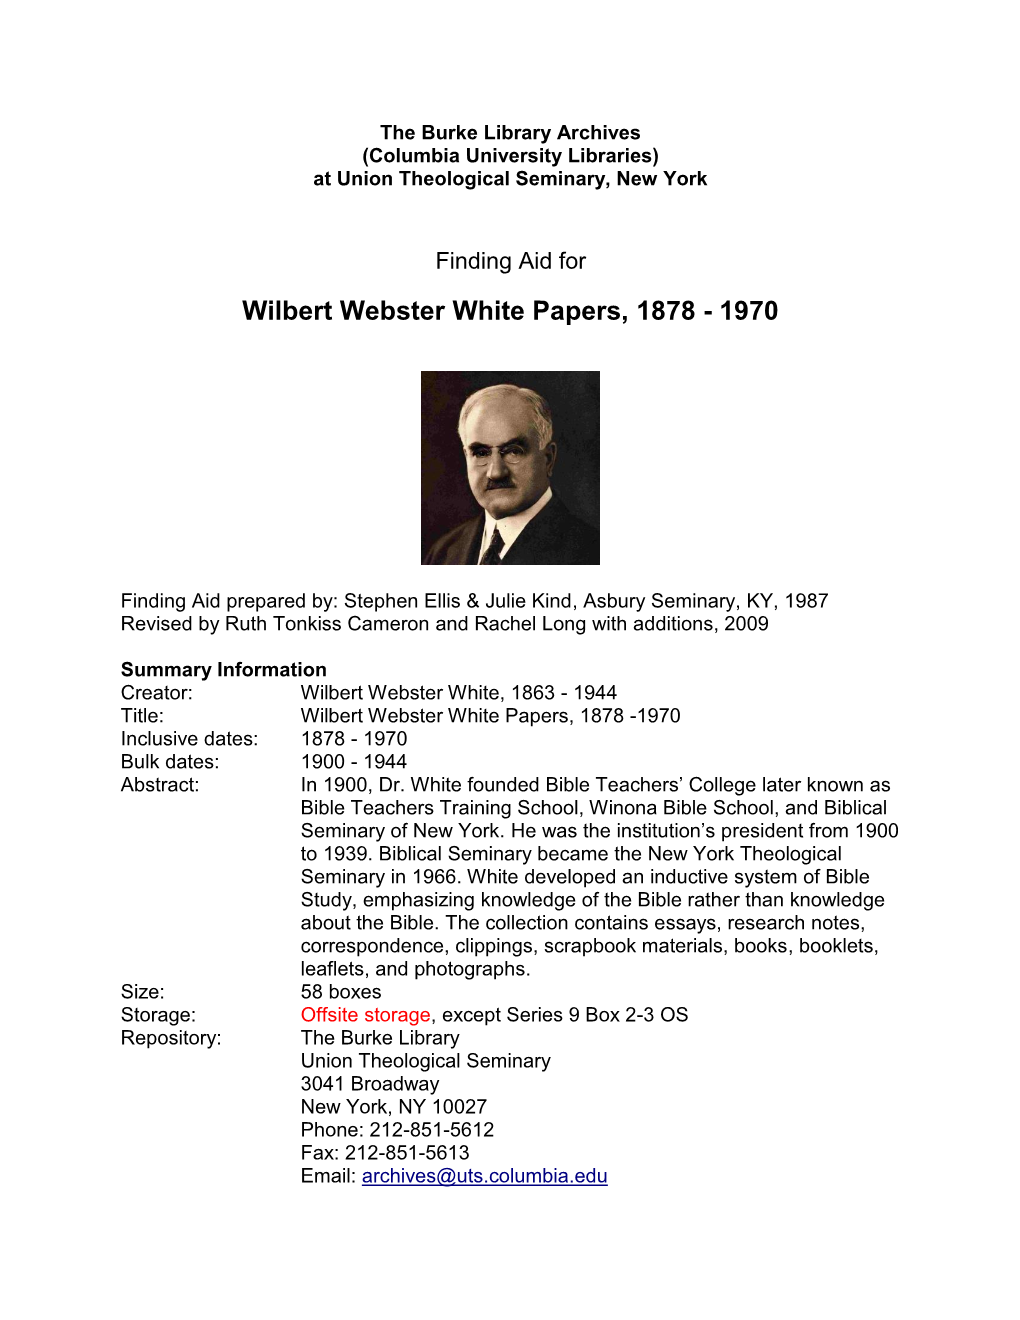 Wilbert Webster White Papers, 1878 - 1970